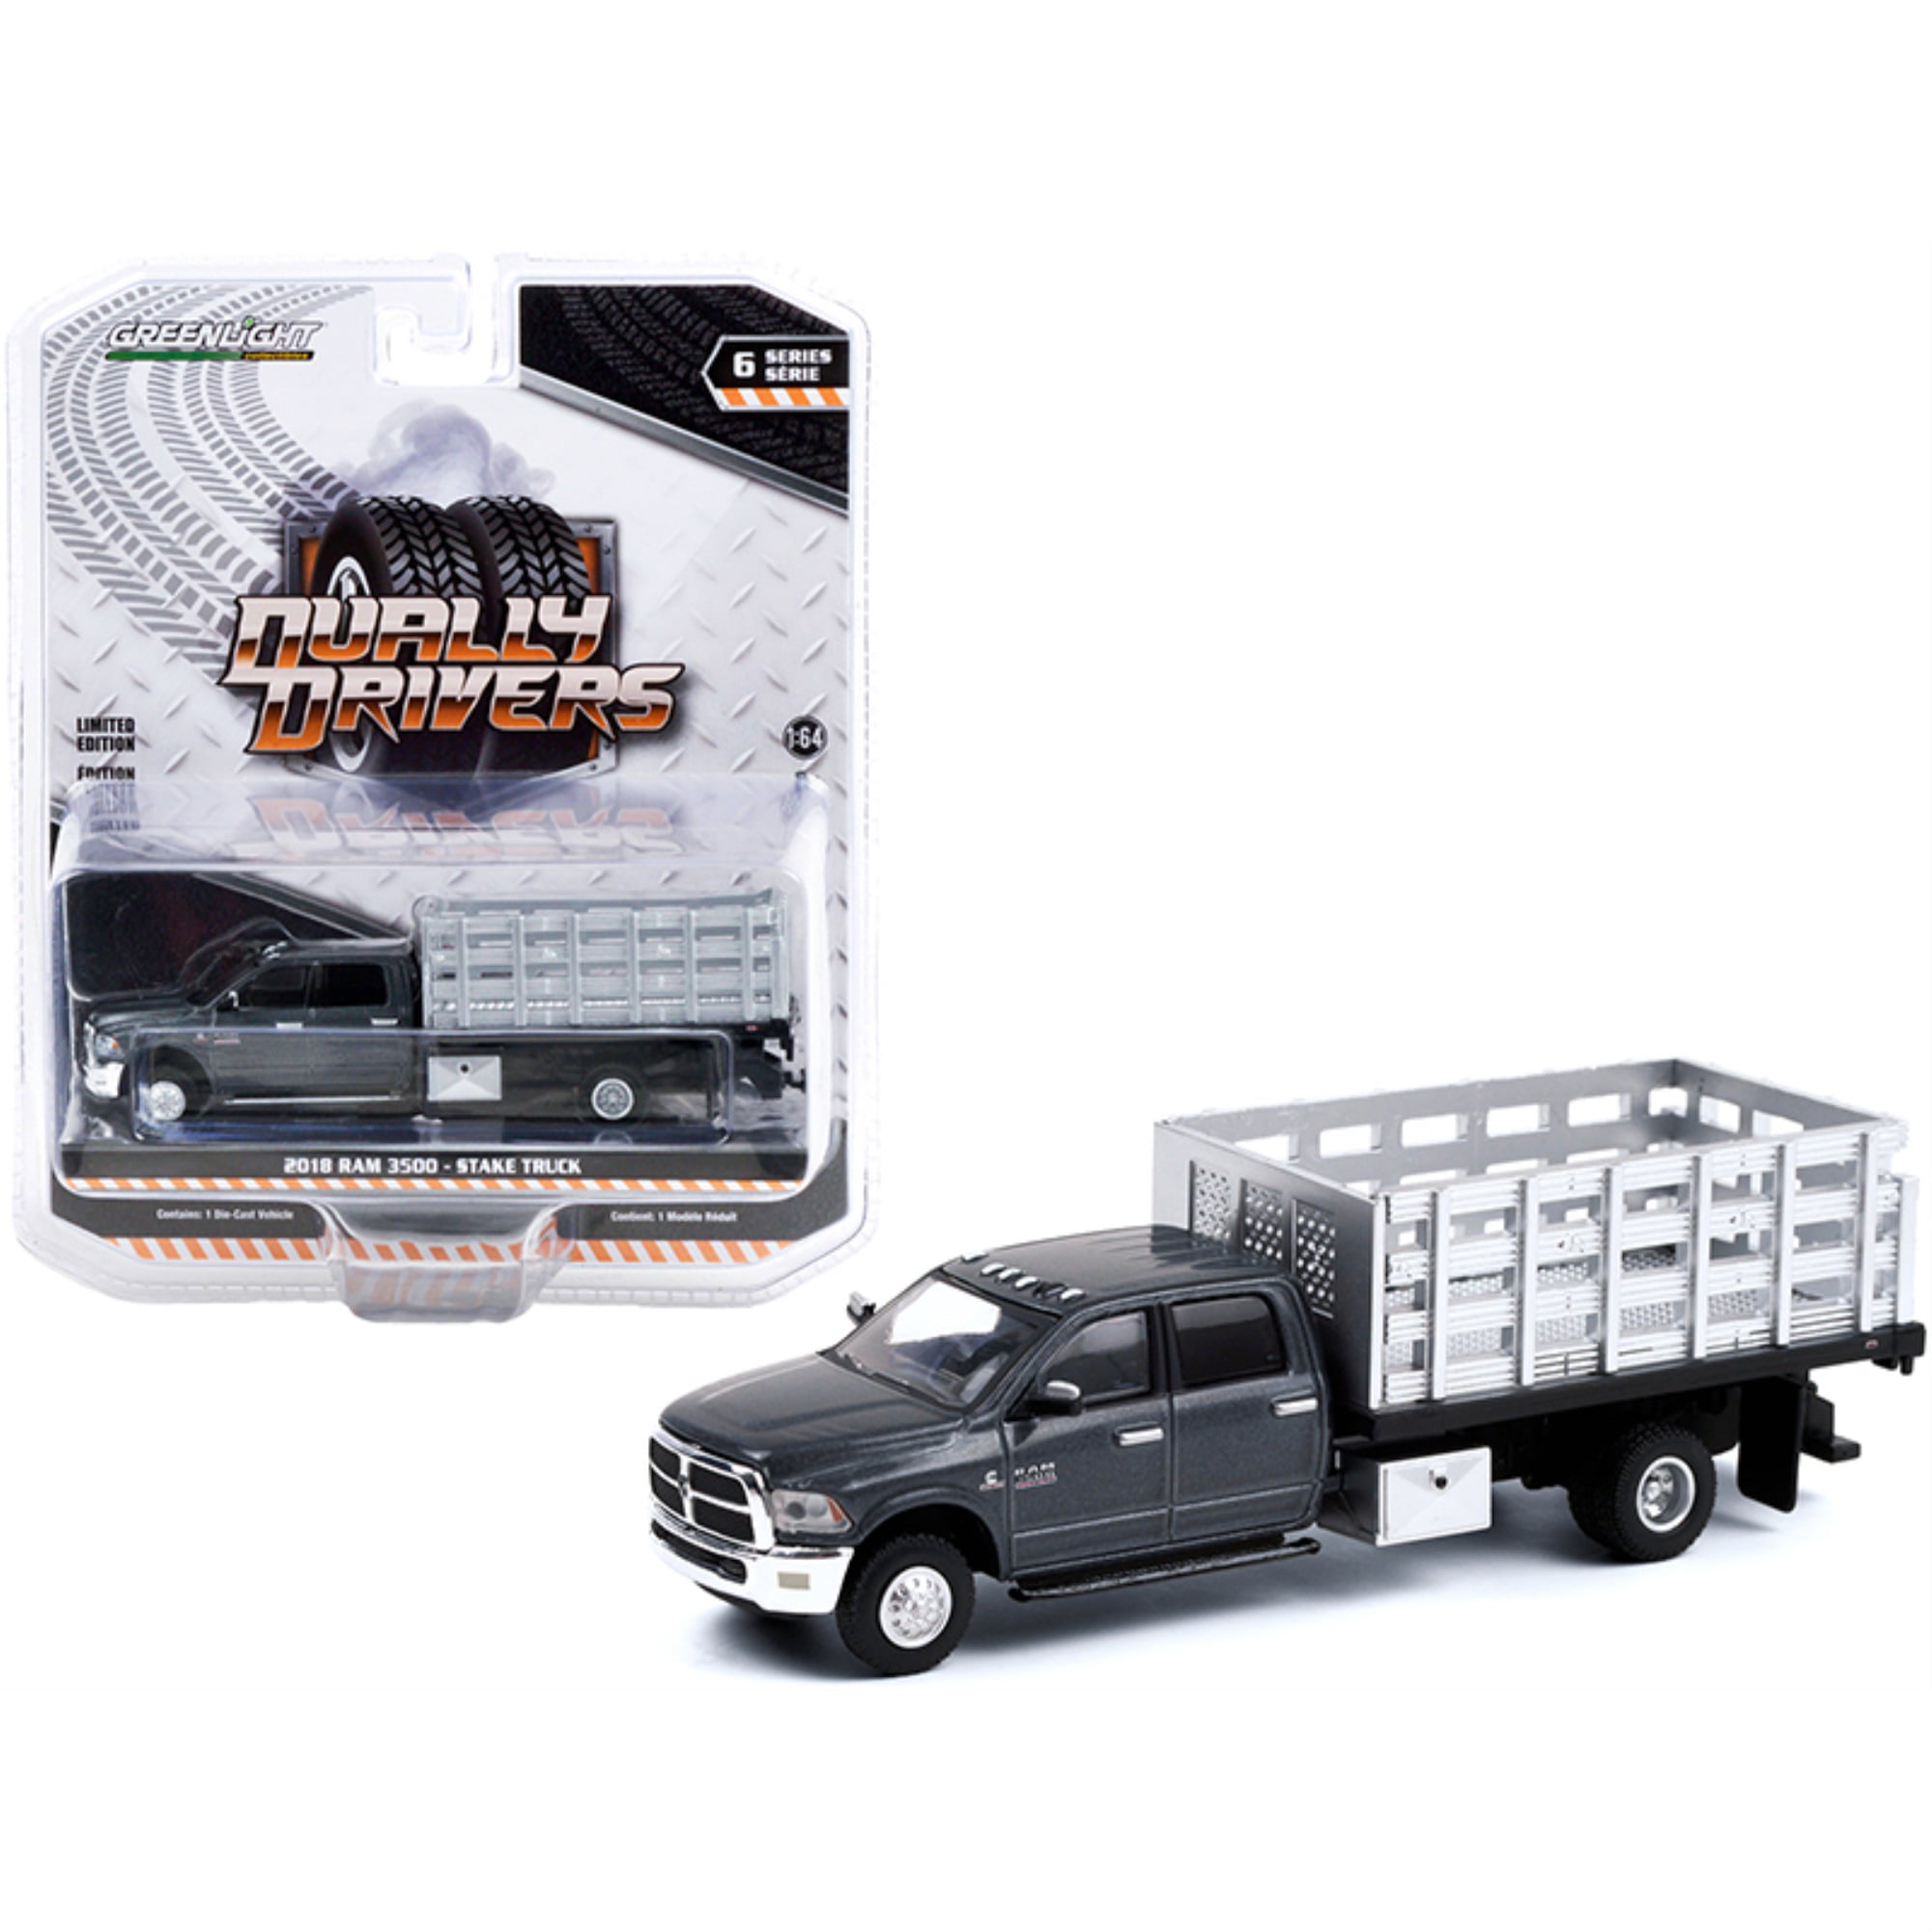 Pre-Order Greenlight Dually Drivers Series 6-6-Piece Set 